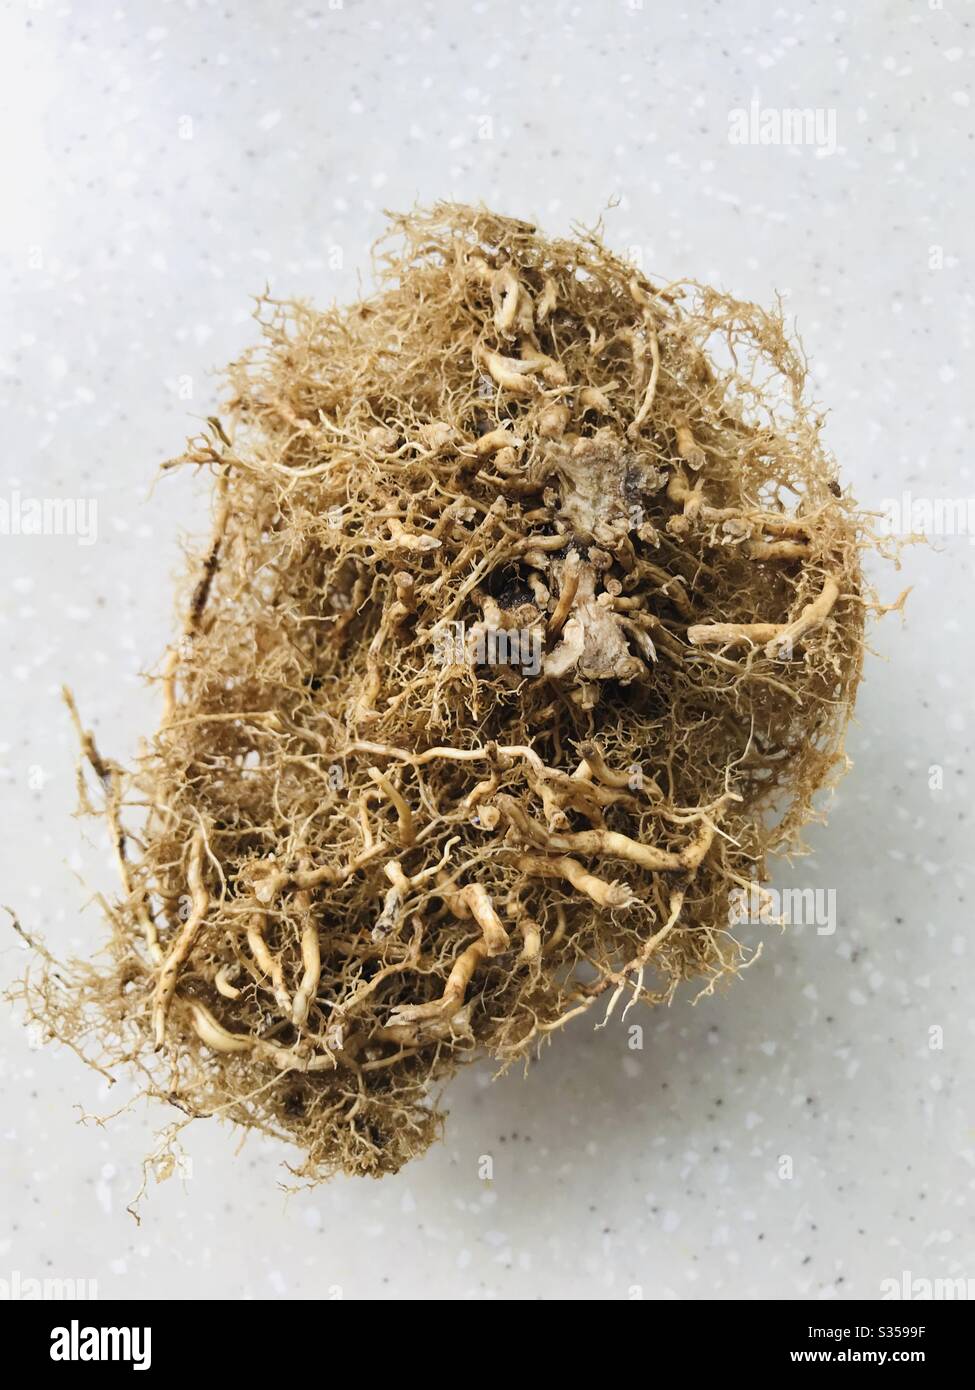 Home grown Chrysopogon Zizanioides roots - Ramacham in malayalam , Vetiver in Tamil, used for medicinal purpose , food & flavouring, perfume & aromatherapy, Singapore Stock Photo